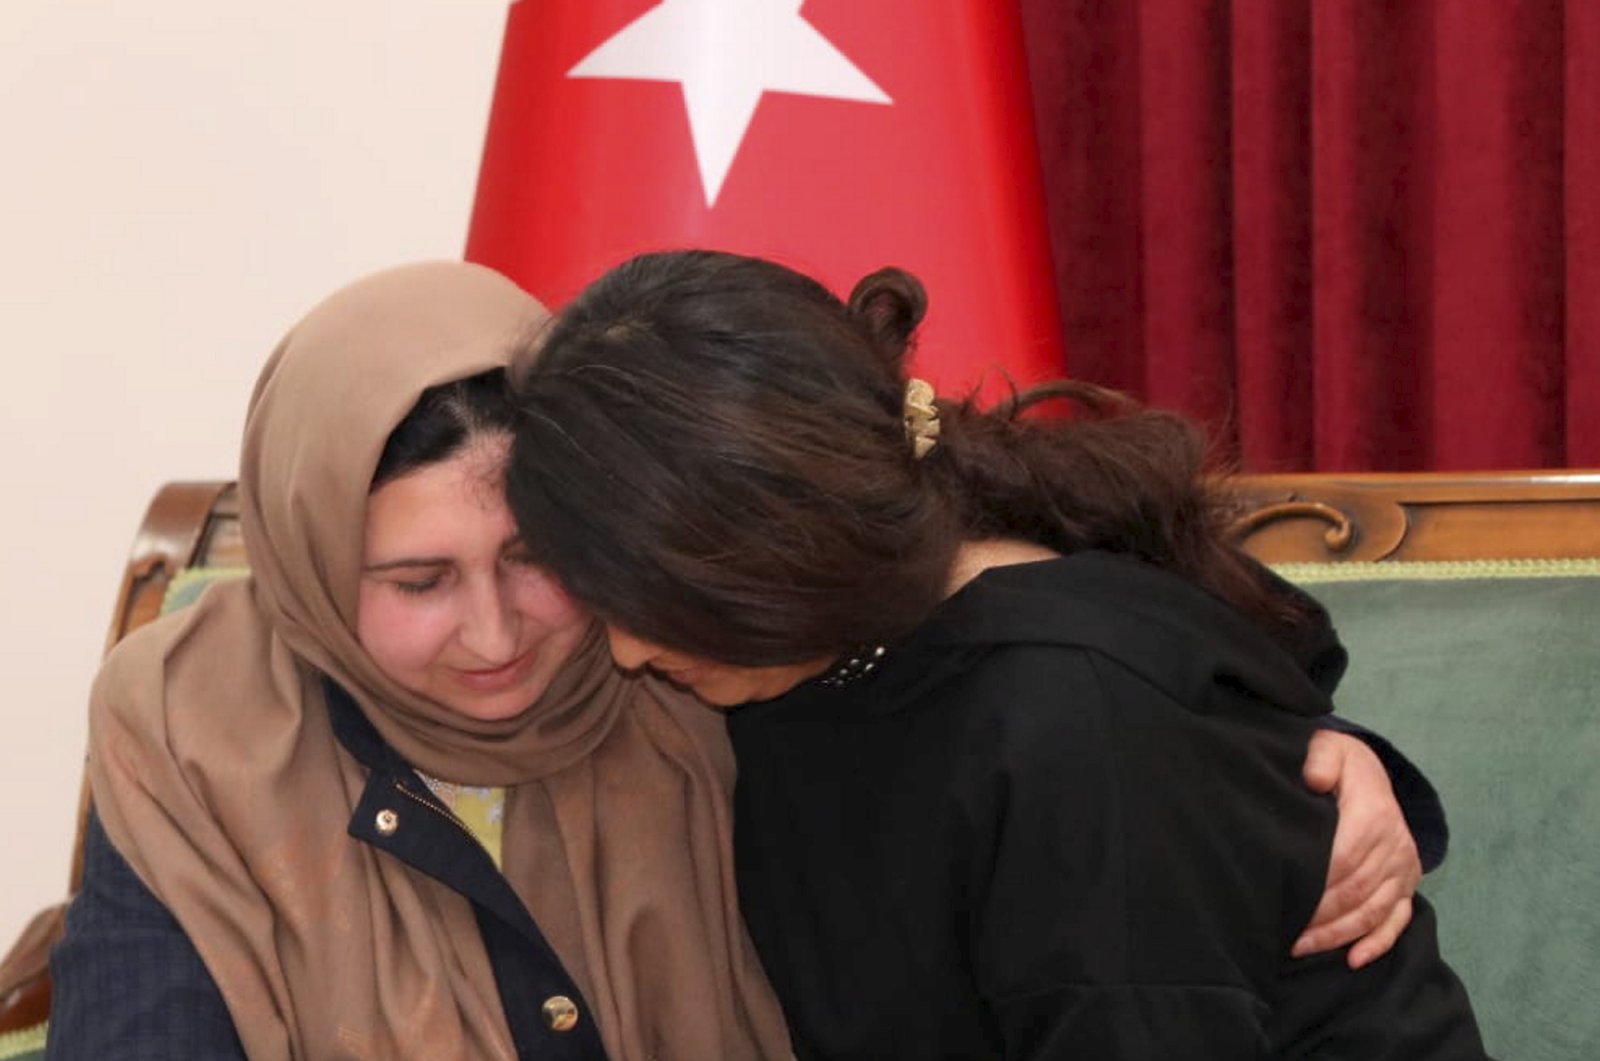 Tekoşin Acar, 27, surrendered thanks to the efforts of the security forces and met with her mother, Naime Dalmış, who she has not seen for six years, March 9, 2020. 